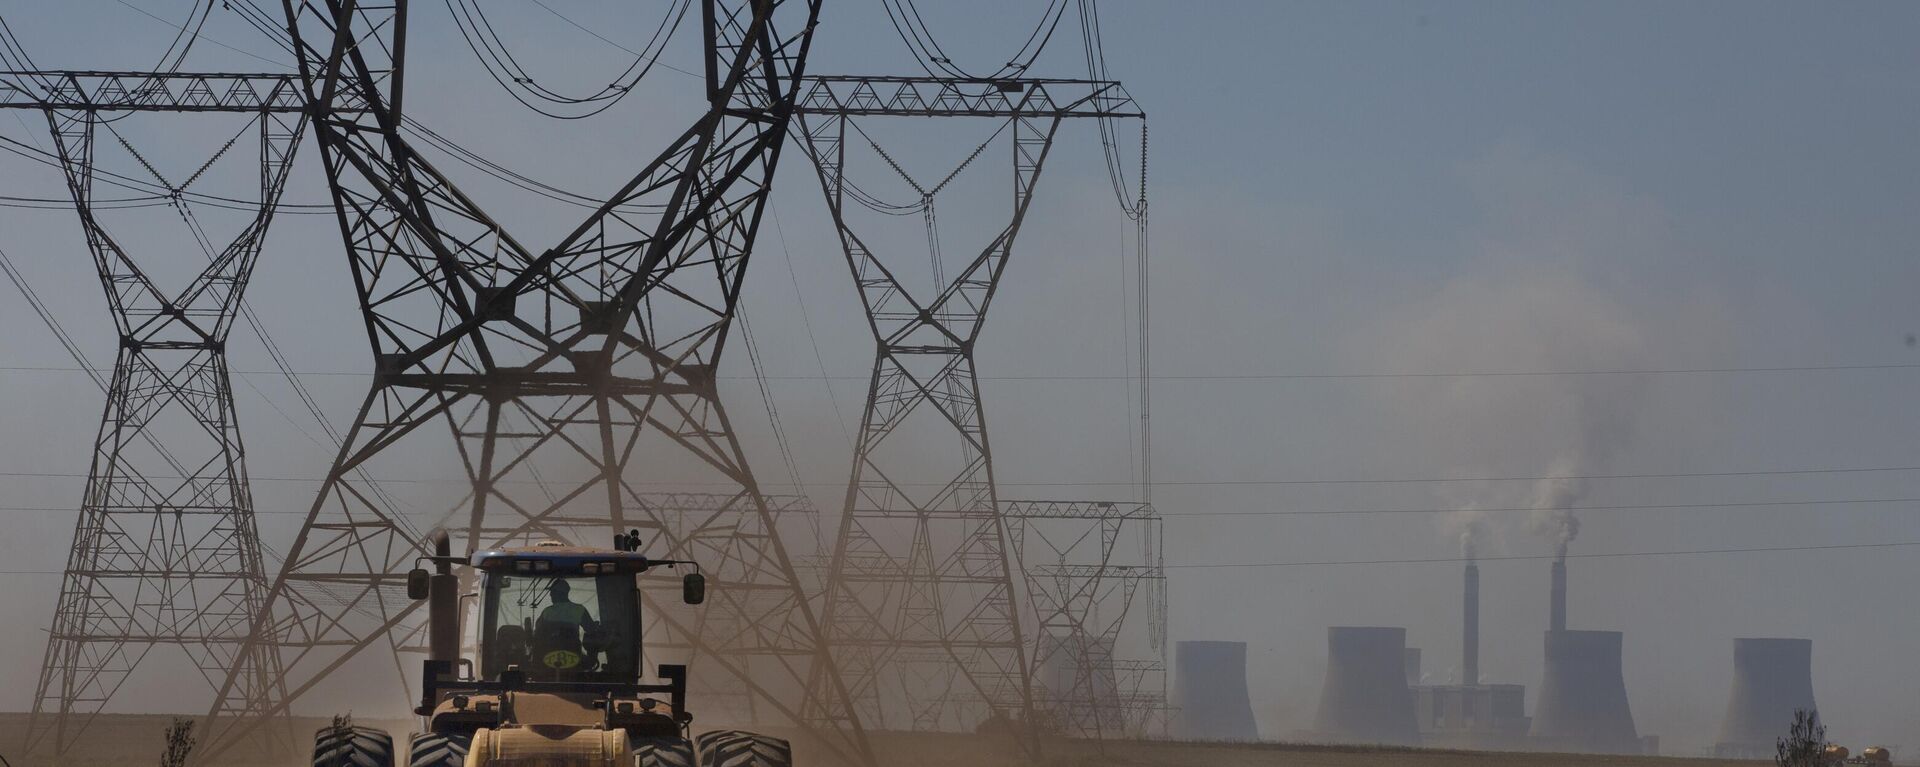 The land is ploughed under electrical pylons leading from a coal-powered electricity generating plant east of Johannesburg, Thursday, Nov. 17 2022. - Sputnik International, 1920, 28.07.2023